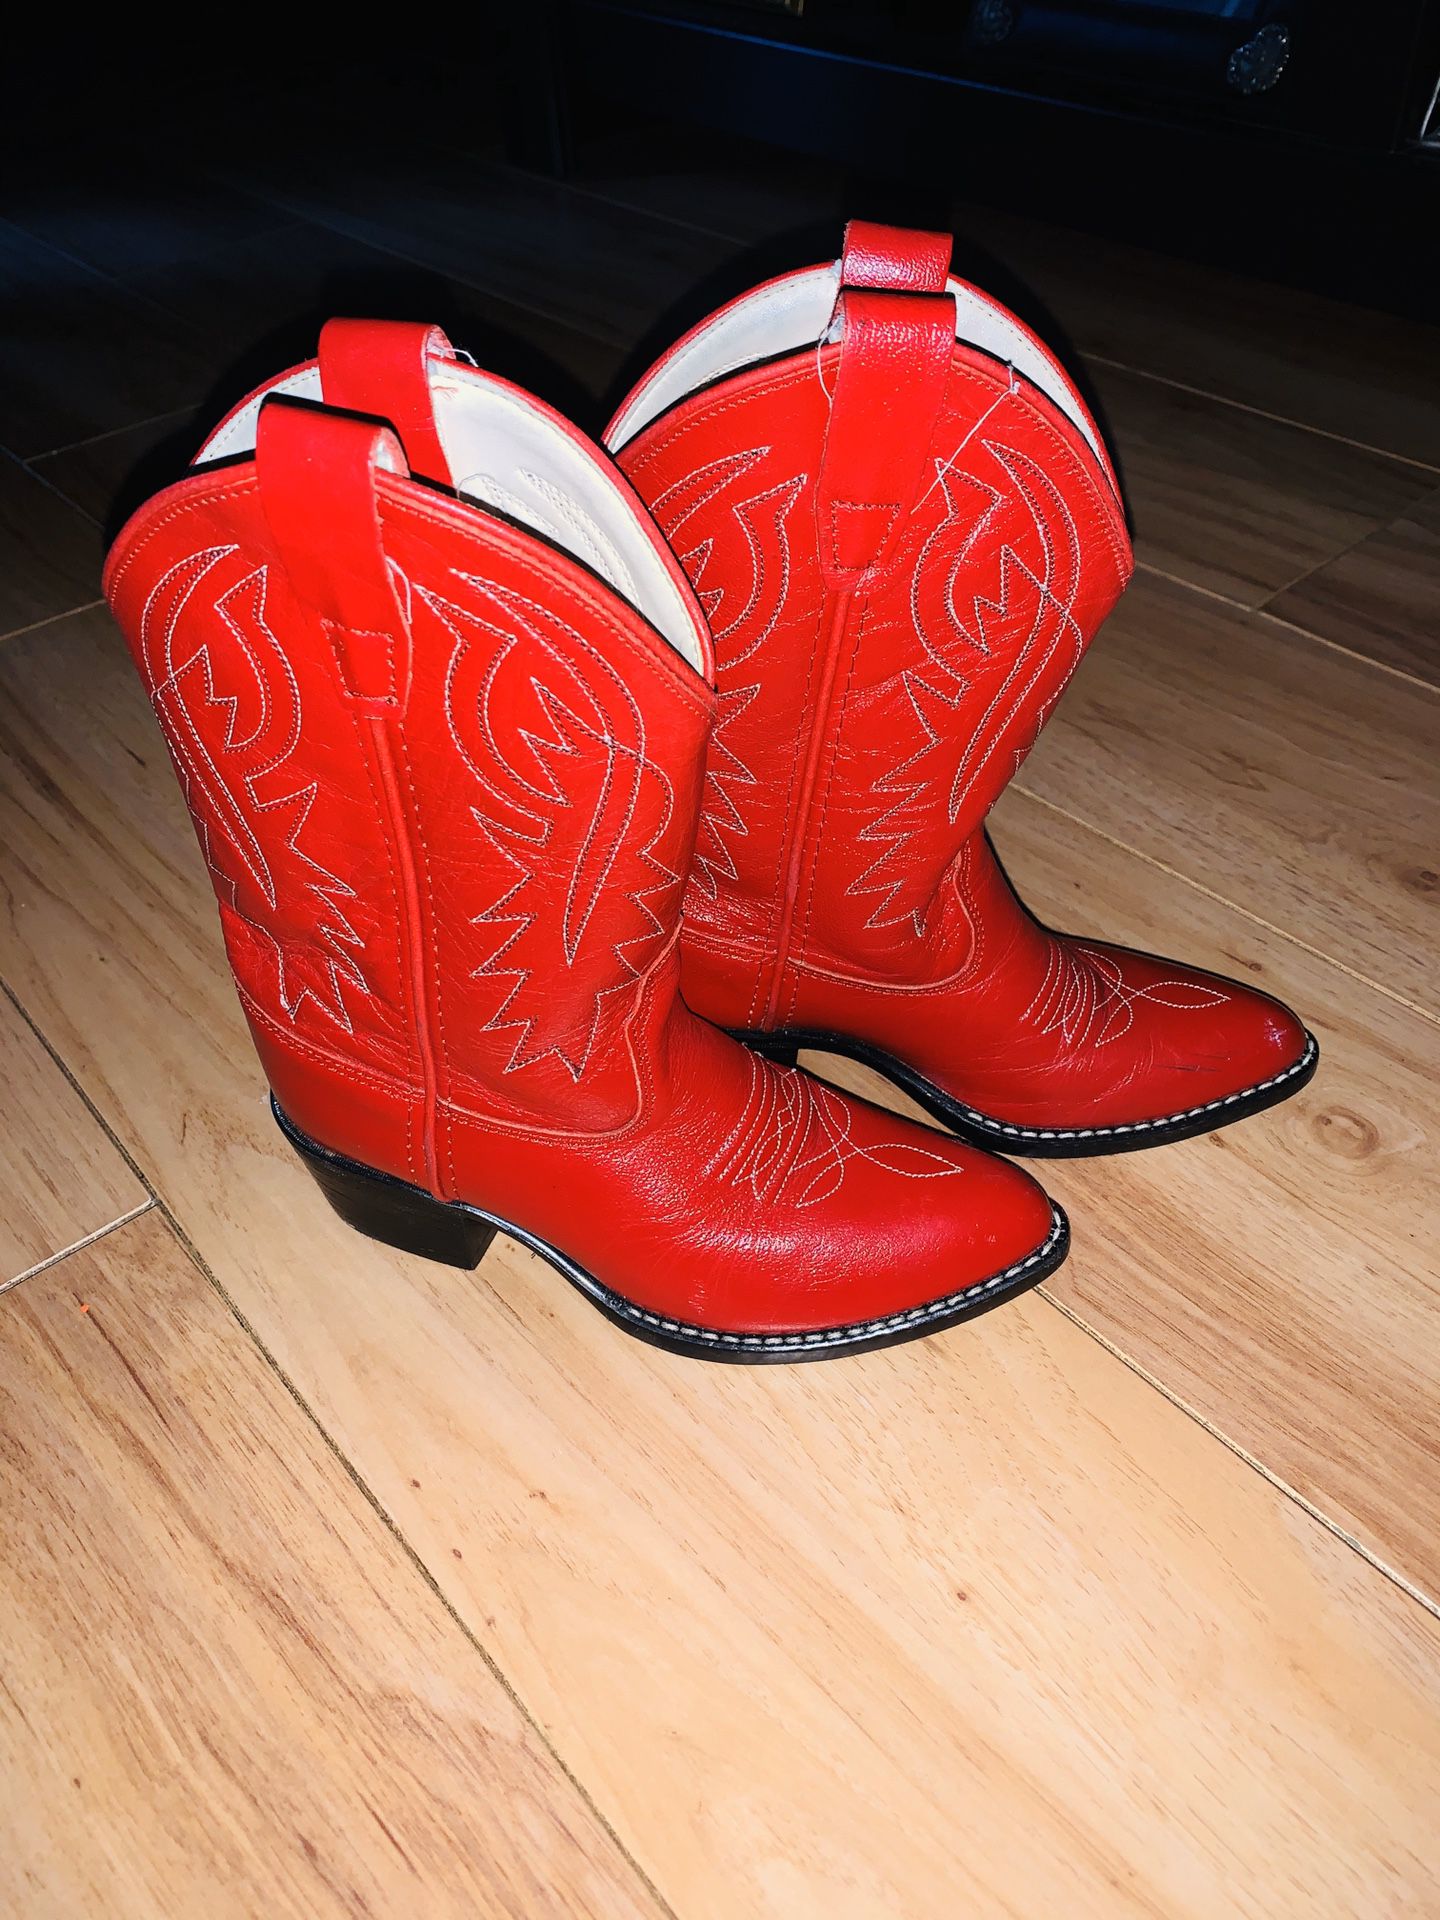 Little girls red cowgirl boots